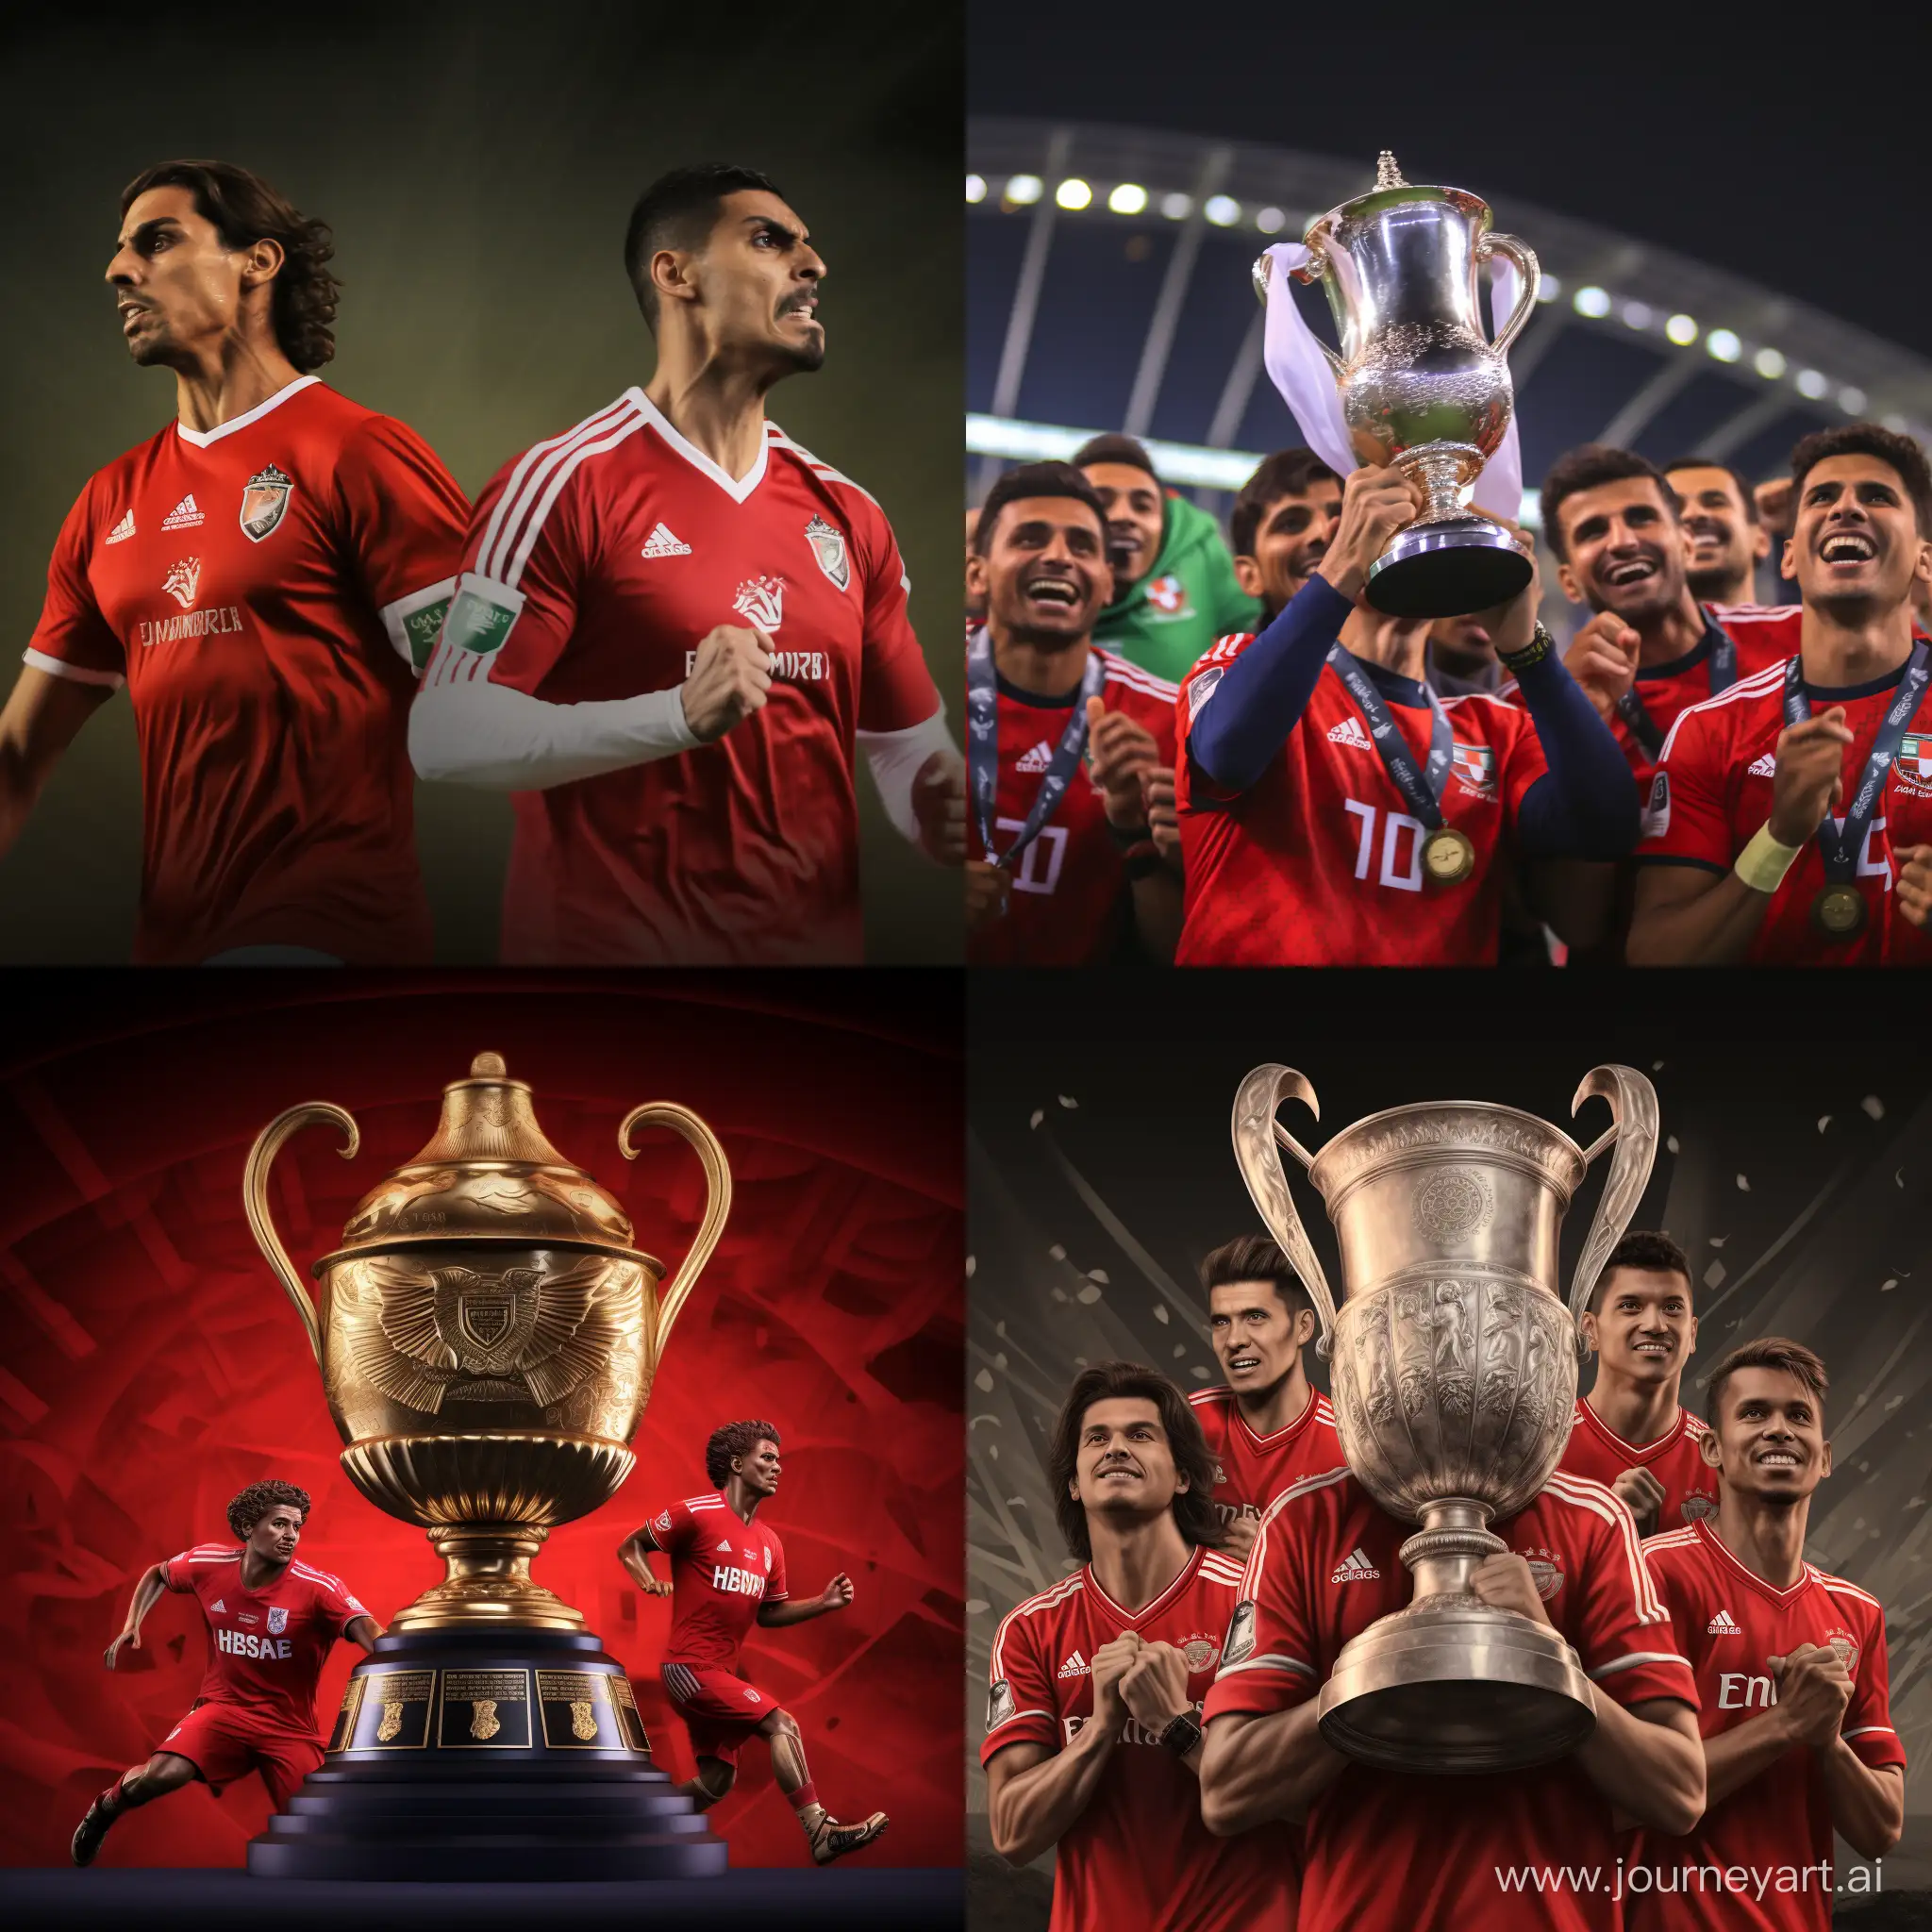 Victorious-AlAhly-Egyptian-Club-Celebrates-Historic-Club-World-Cup-Win